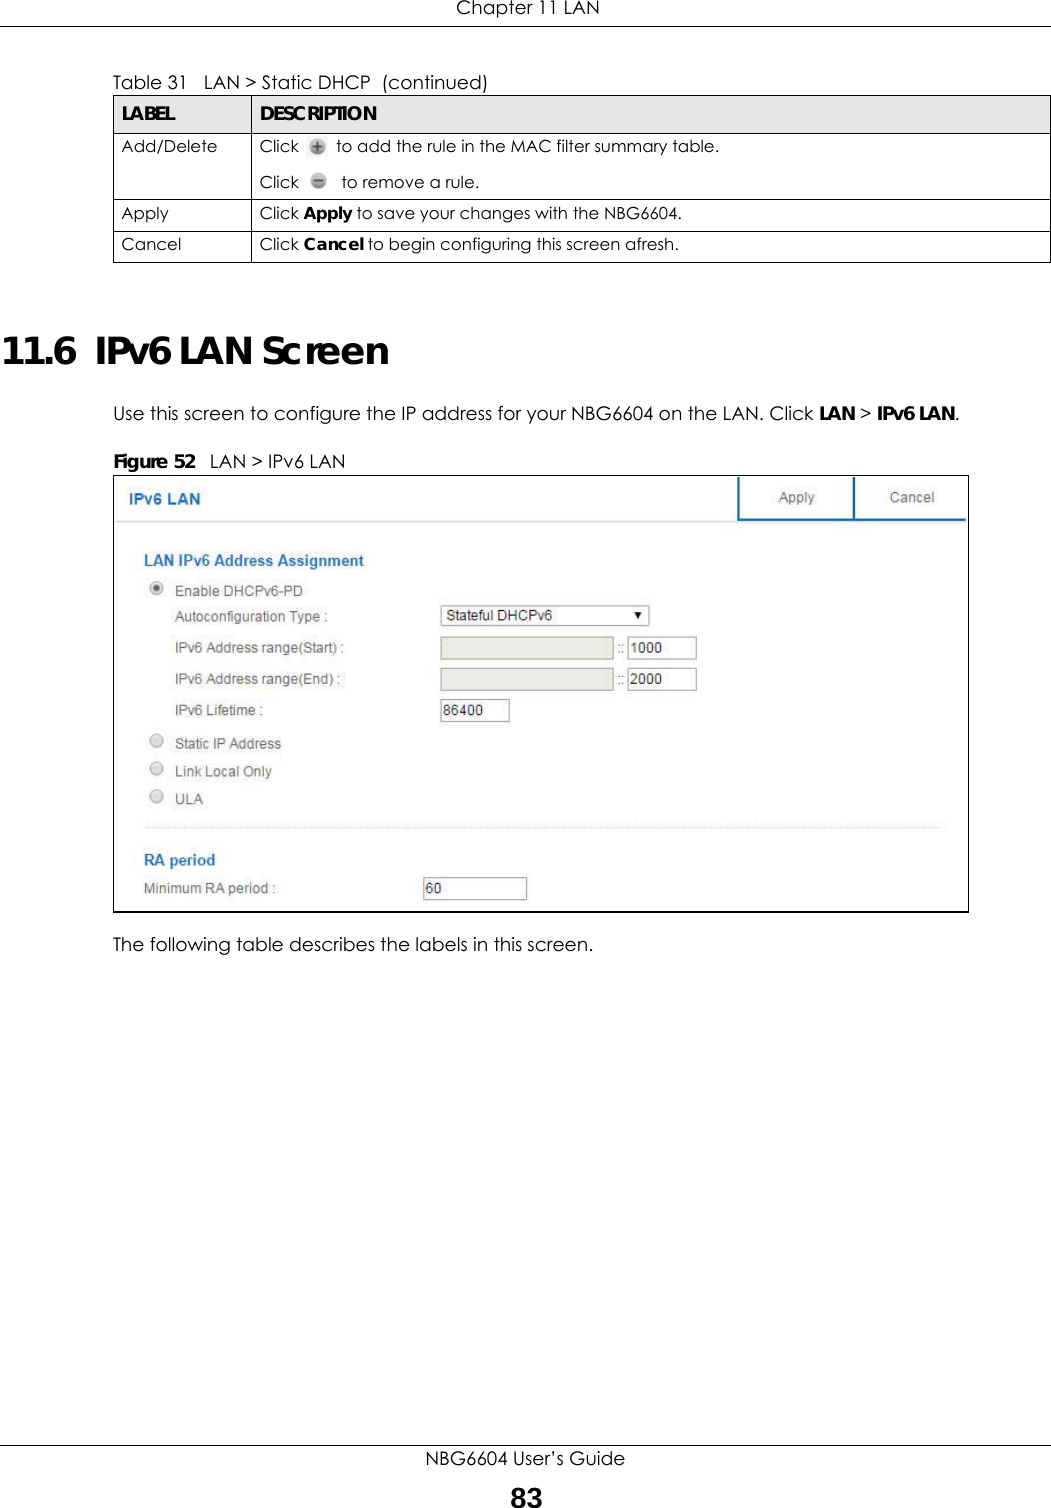  Chapter 11 LANNBG6604 User’s Guide8311.6  IPv6 LAN ScreenUse this screen to configure the IP address for your NBG6604 on the LAN. Click LAN &gt; IPv6 LAN.Figure 52   LAN &gt; IPv6 LAN The following table describes the labels in this screen.Add/Delete Click   to add the rule in the MAC filter summary table.Click   to remove a rule.Apply Click Apply to save your changes with the NBG6604.Cancel Click Cancel to begin configuring this screen afresh.Table 31   LAN &gt; Static DHCP  (continued)LABEL DESCRIPTION